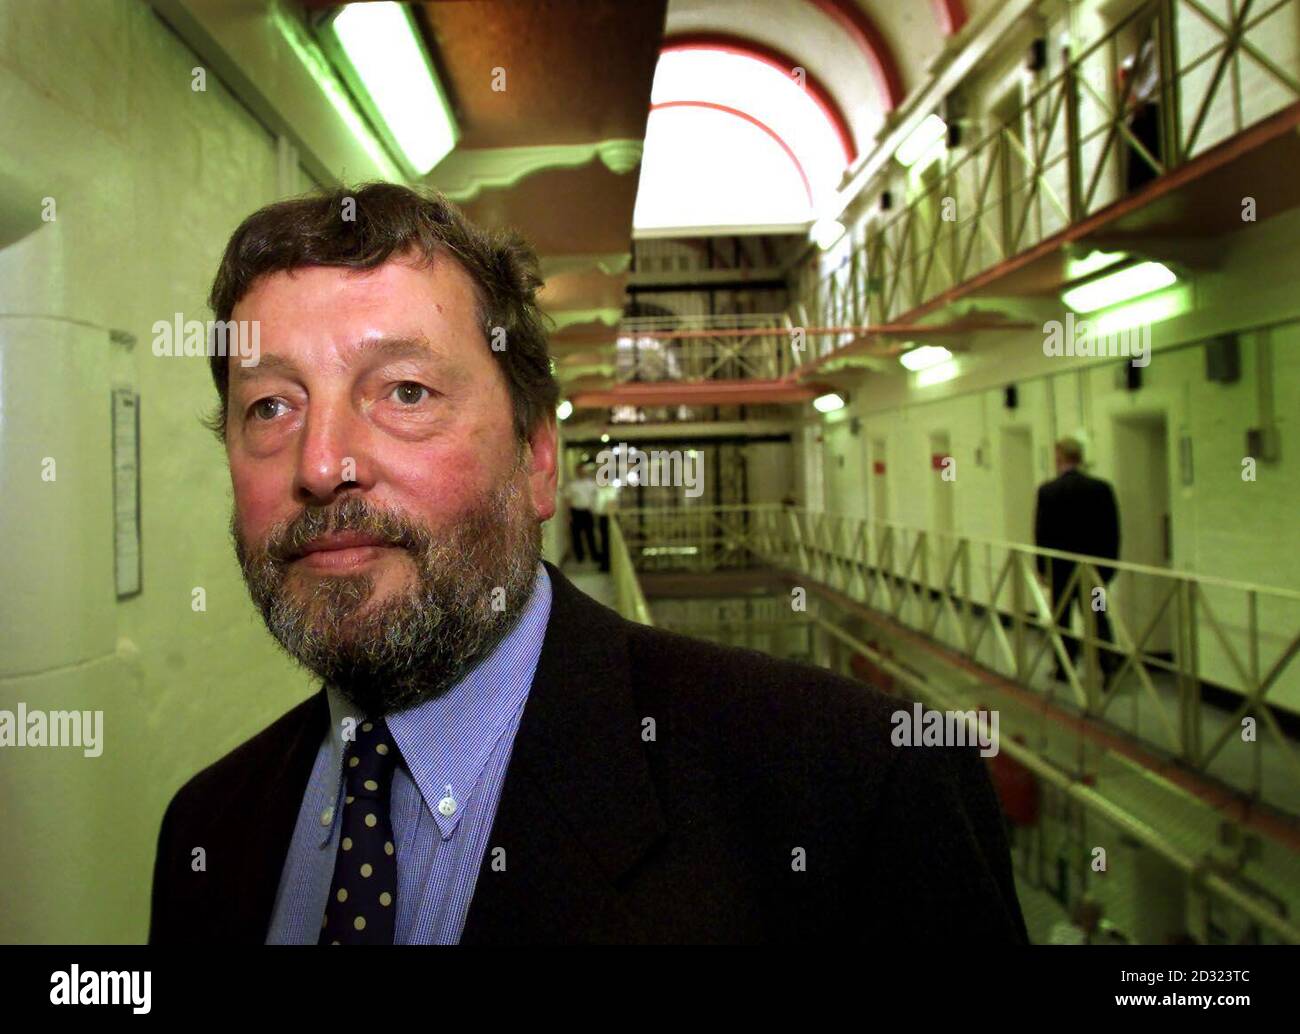 Home Secretary David Blunkett on D Wing at HMP Leeds, Wednesday August 8 2001, on his 2nd visit to a prison since taking up the post. Mr Blunkett was announcing a pilot of a new computer-based education project to help prisoners to prepare for work on release.  Stock Photo